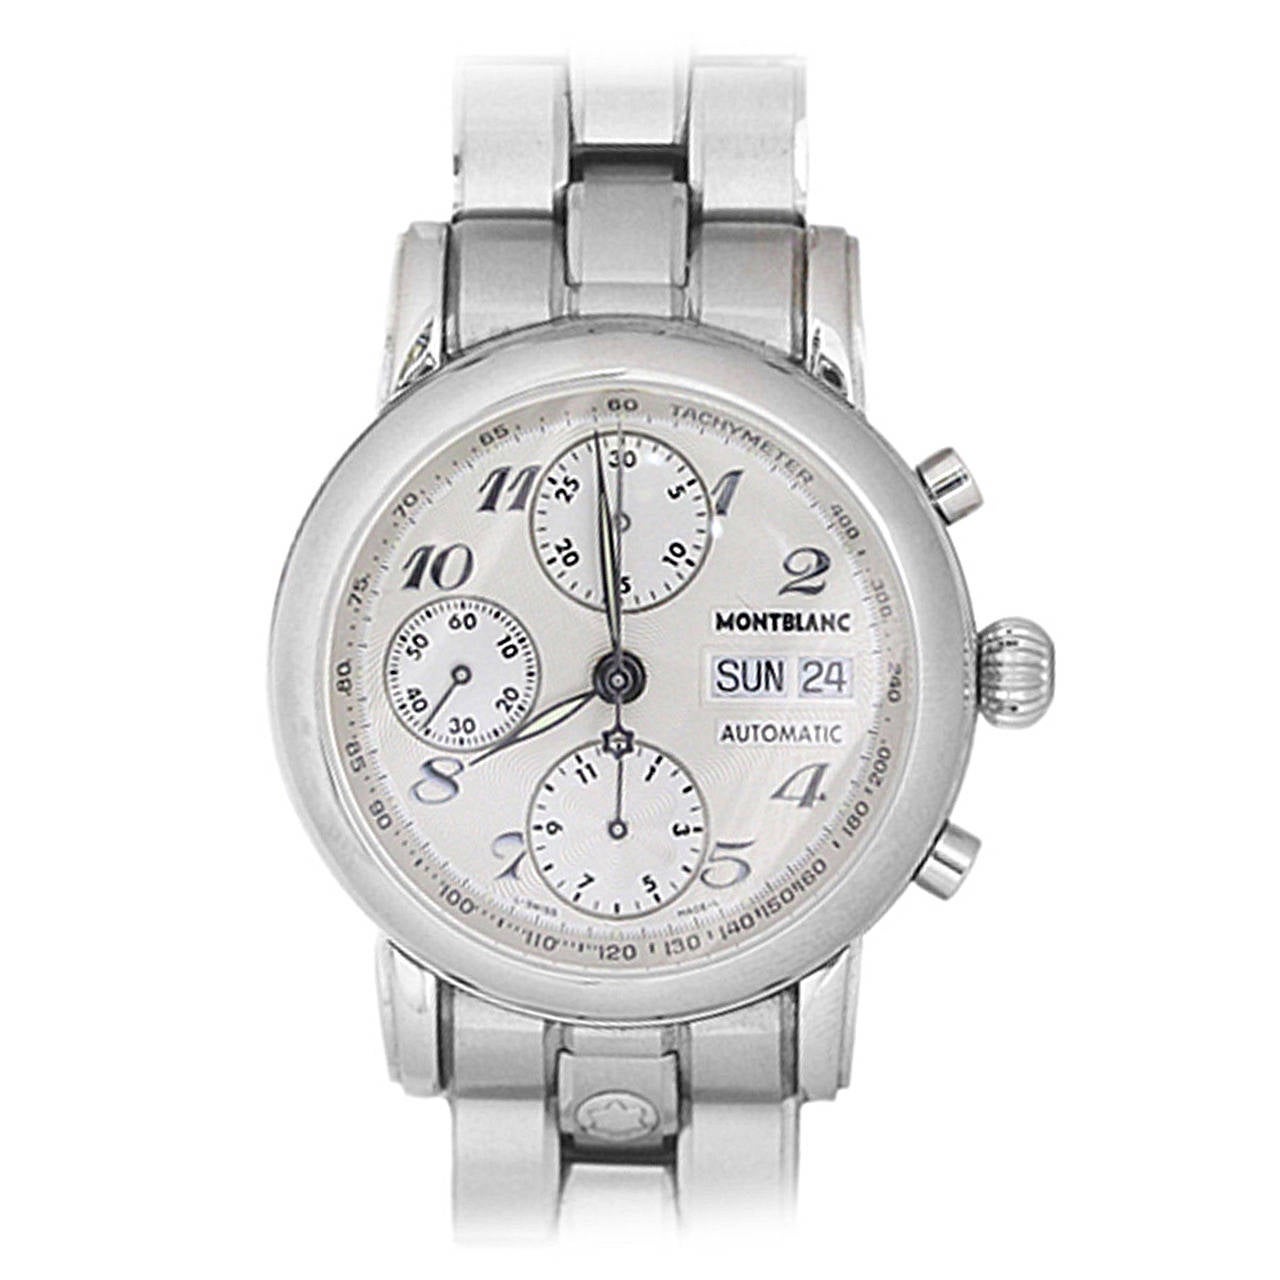 Montblanc Day Date Automatic Tachymeter Wristwatch